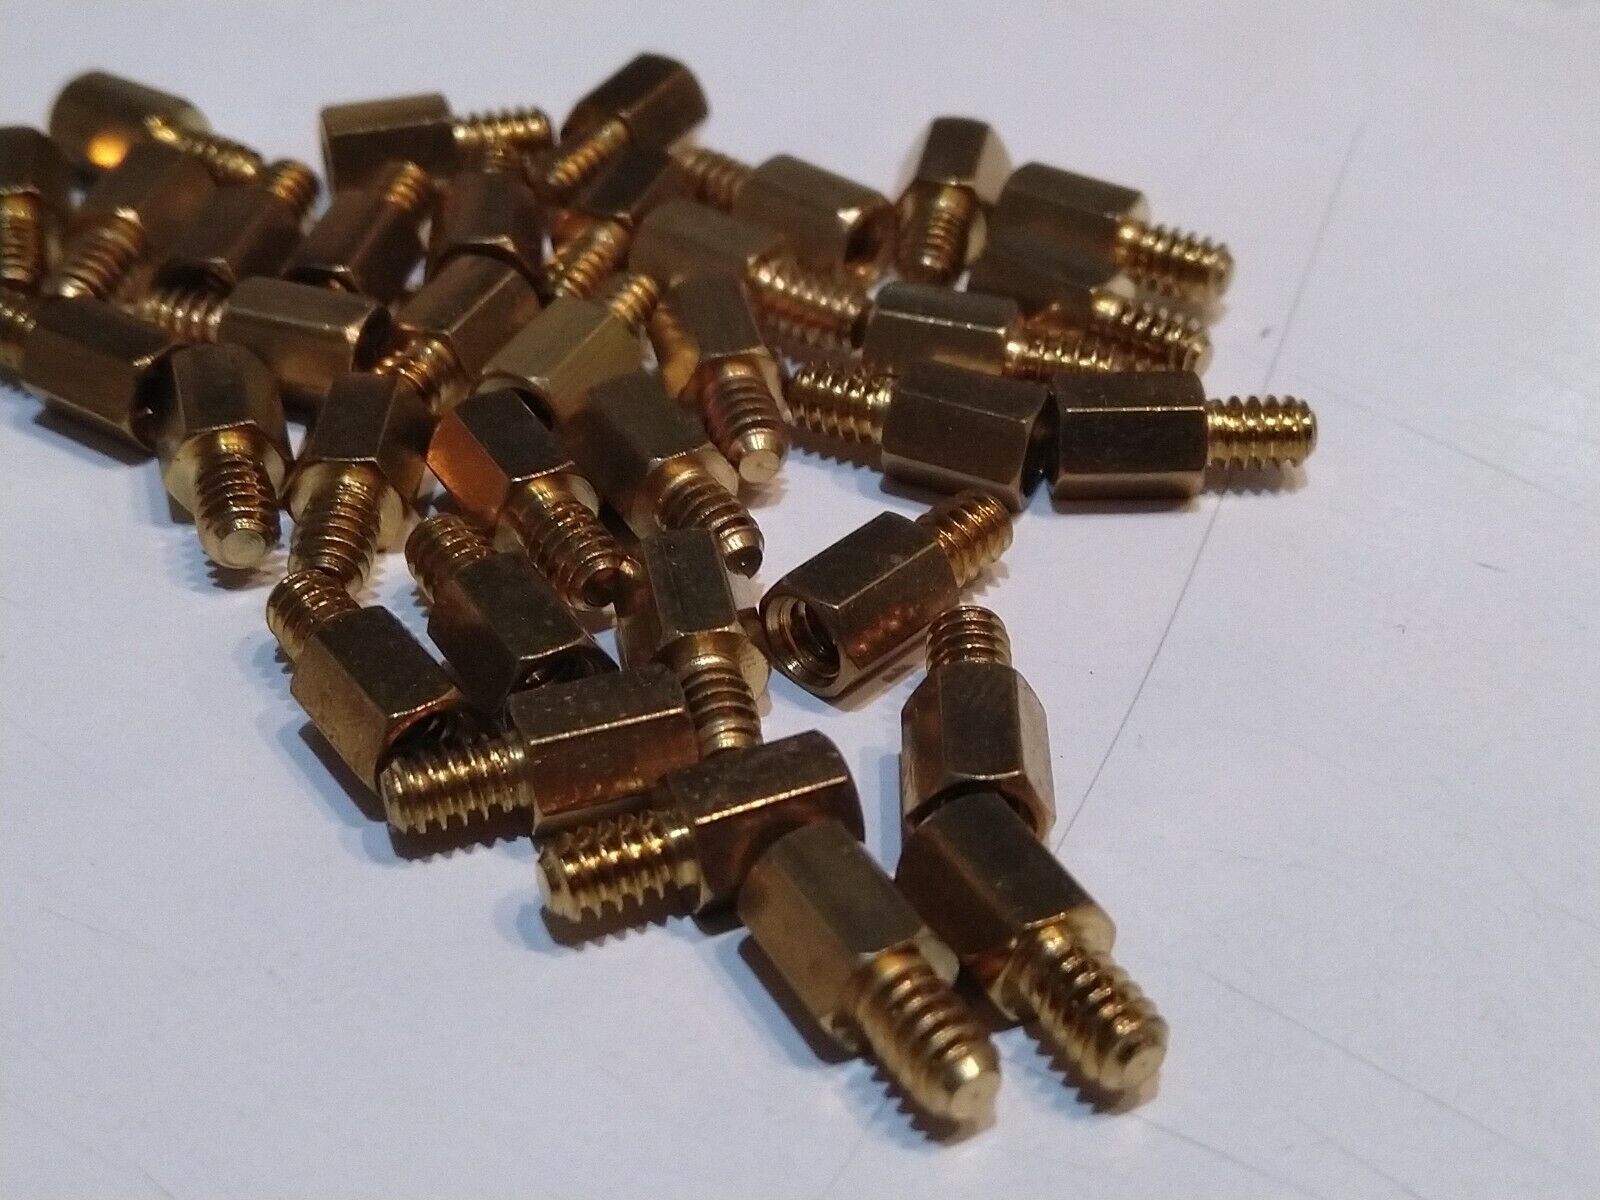 Quantity 1000 brass Computer Motherboard mounting  stand-offs